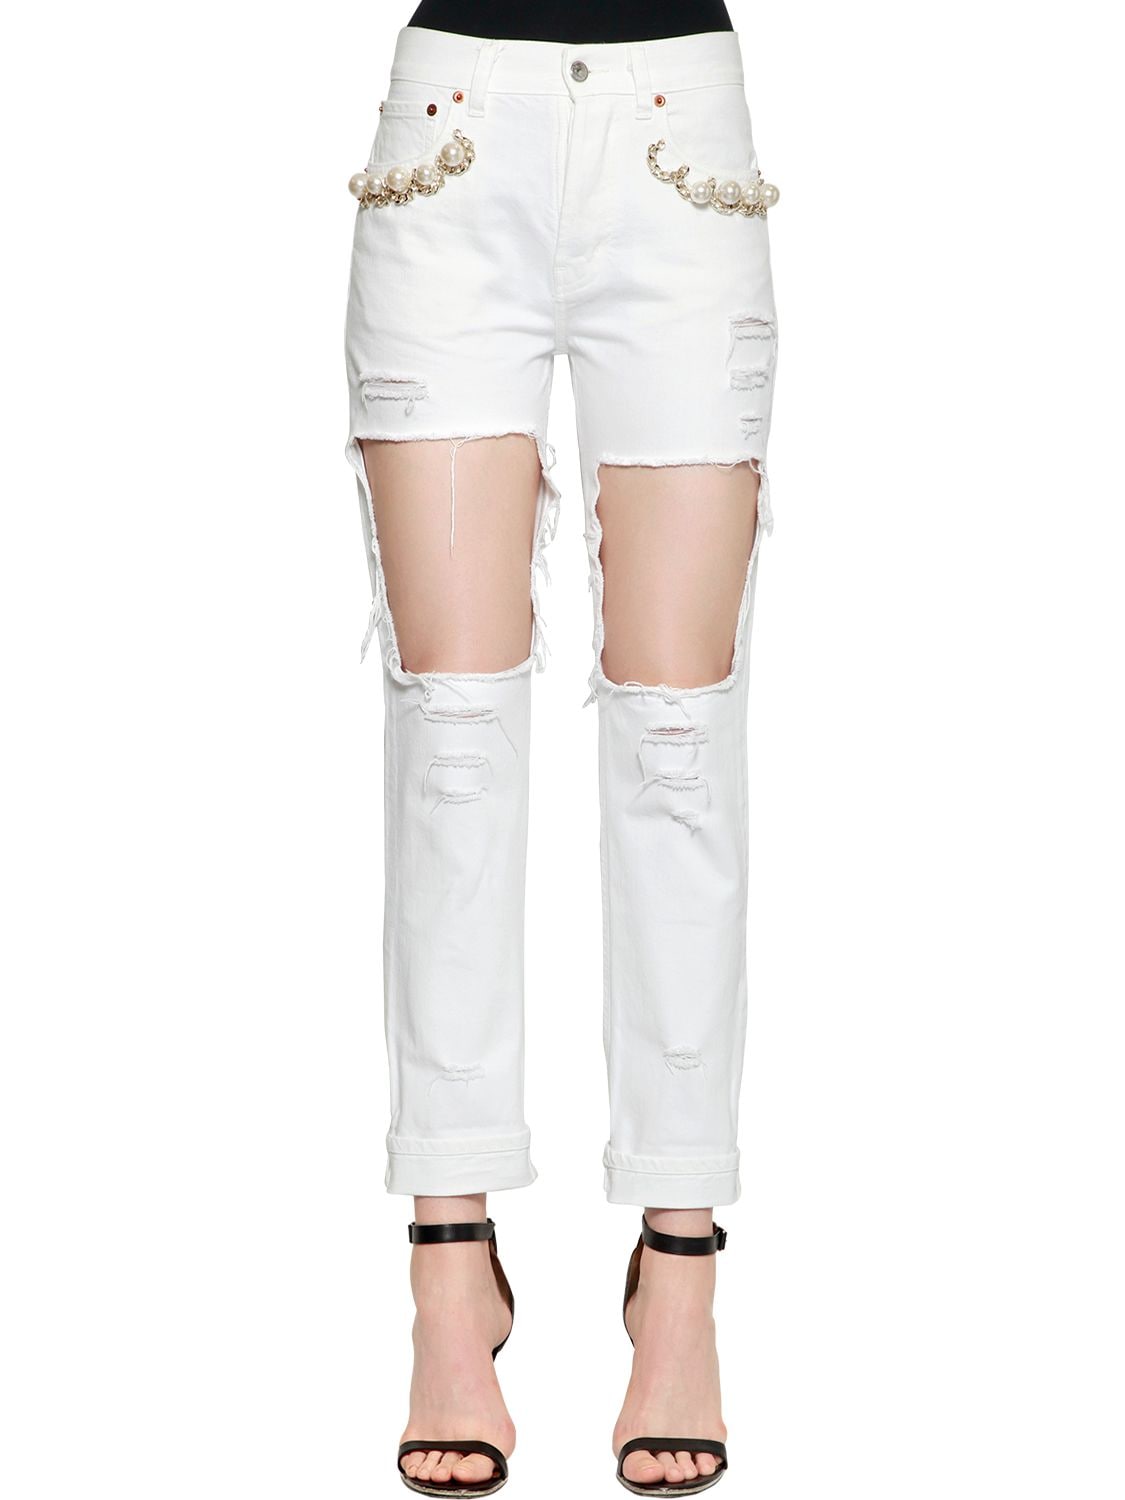 white cut out jeans